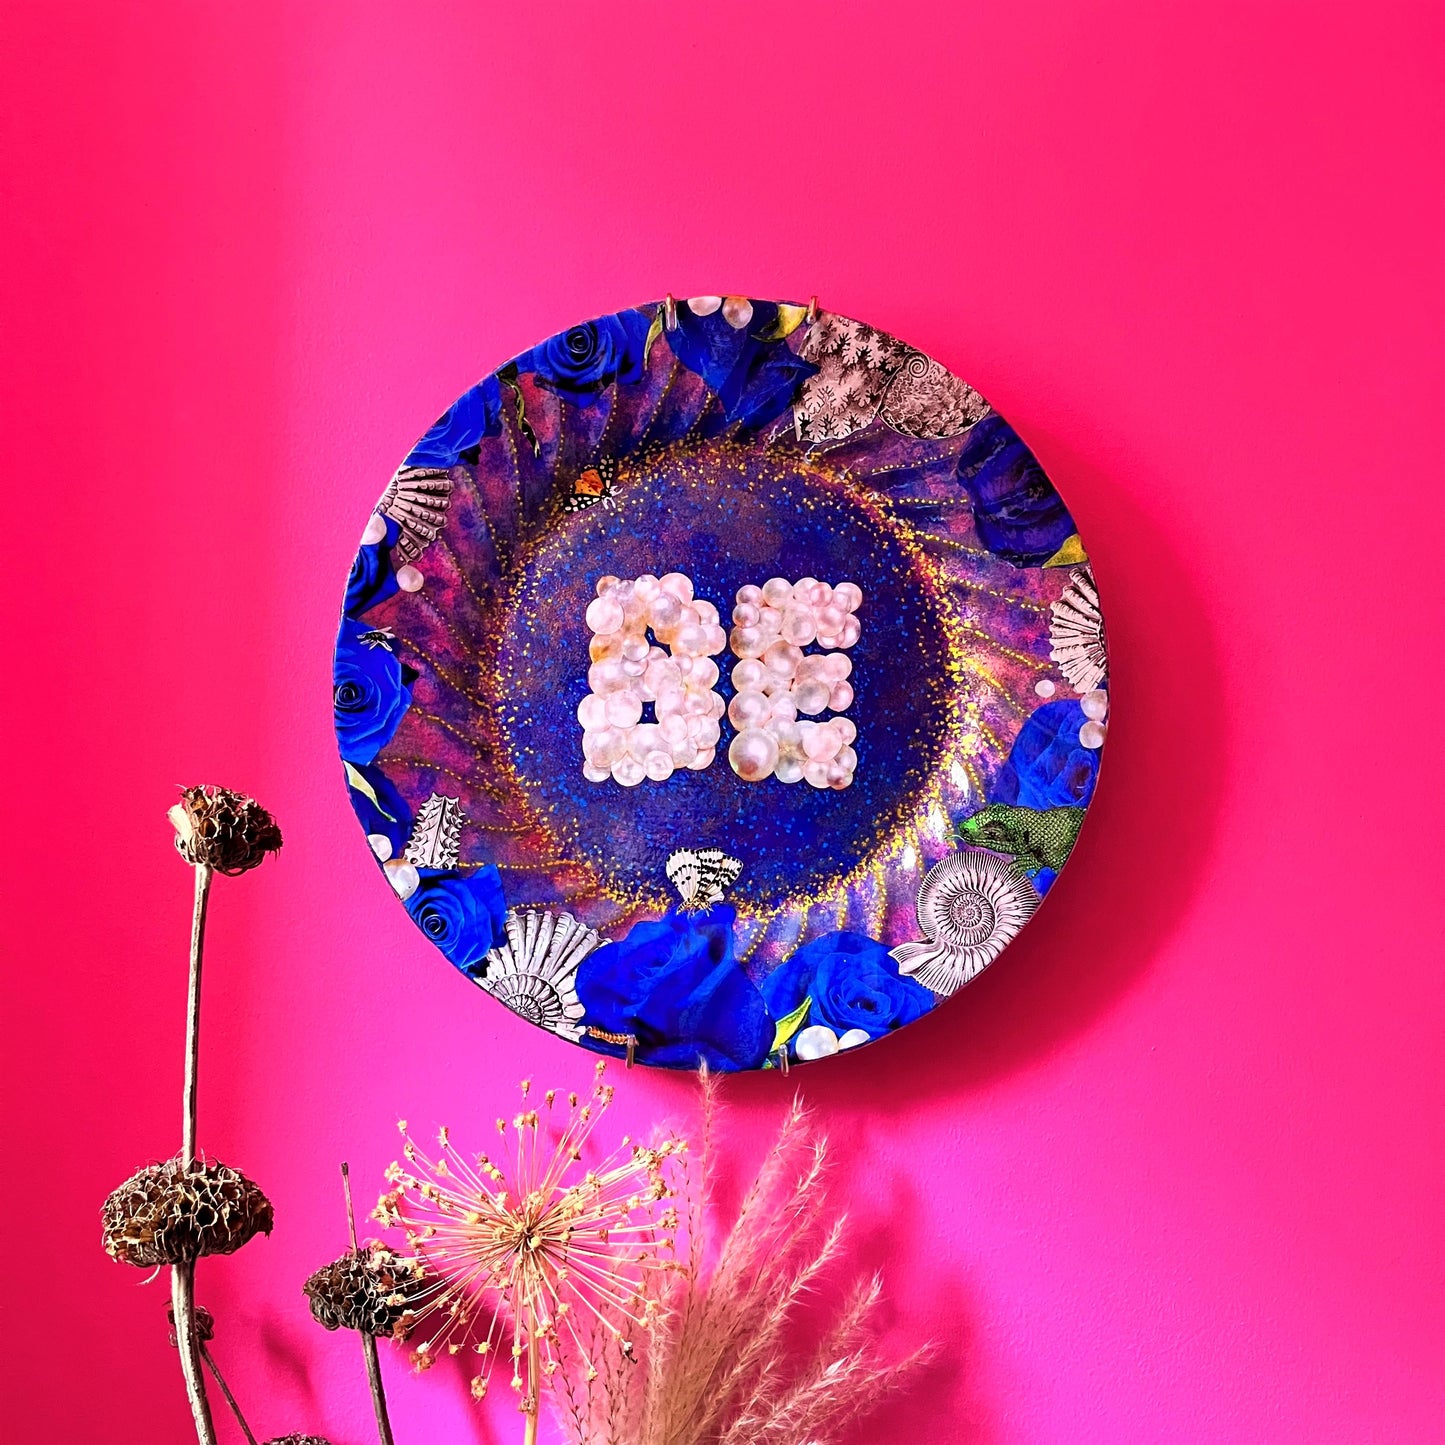 "Be" Wall Plate by House of Frisson. Featuring a collage of the word "Be" written with pearls, framed by blue roses, pearls, shells, and moths, on a blue background with golden details. Lifestyle photo of plate on a pink wall.